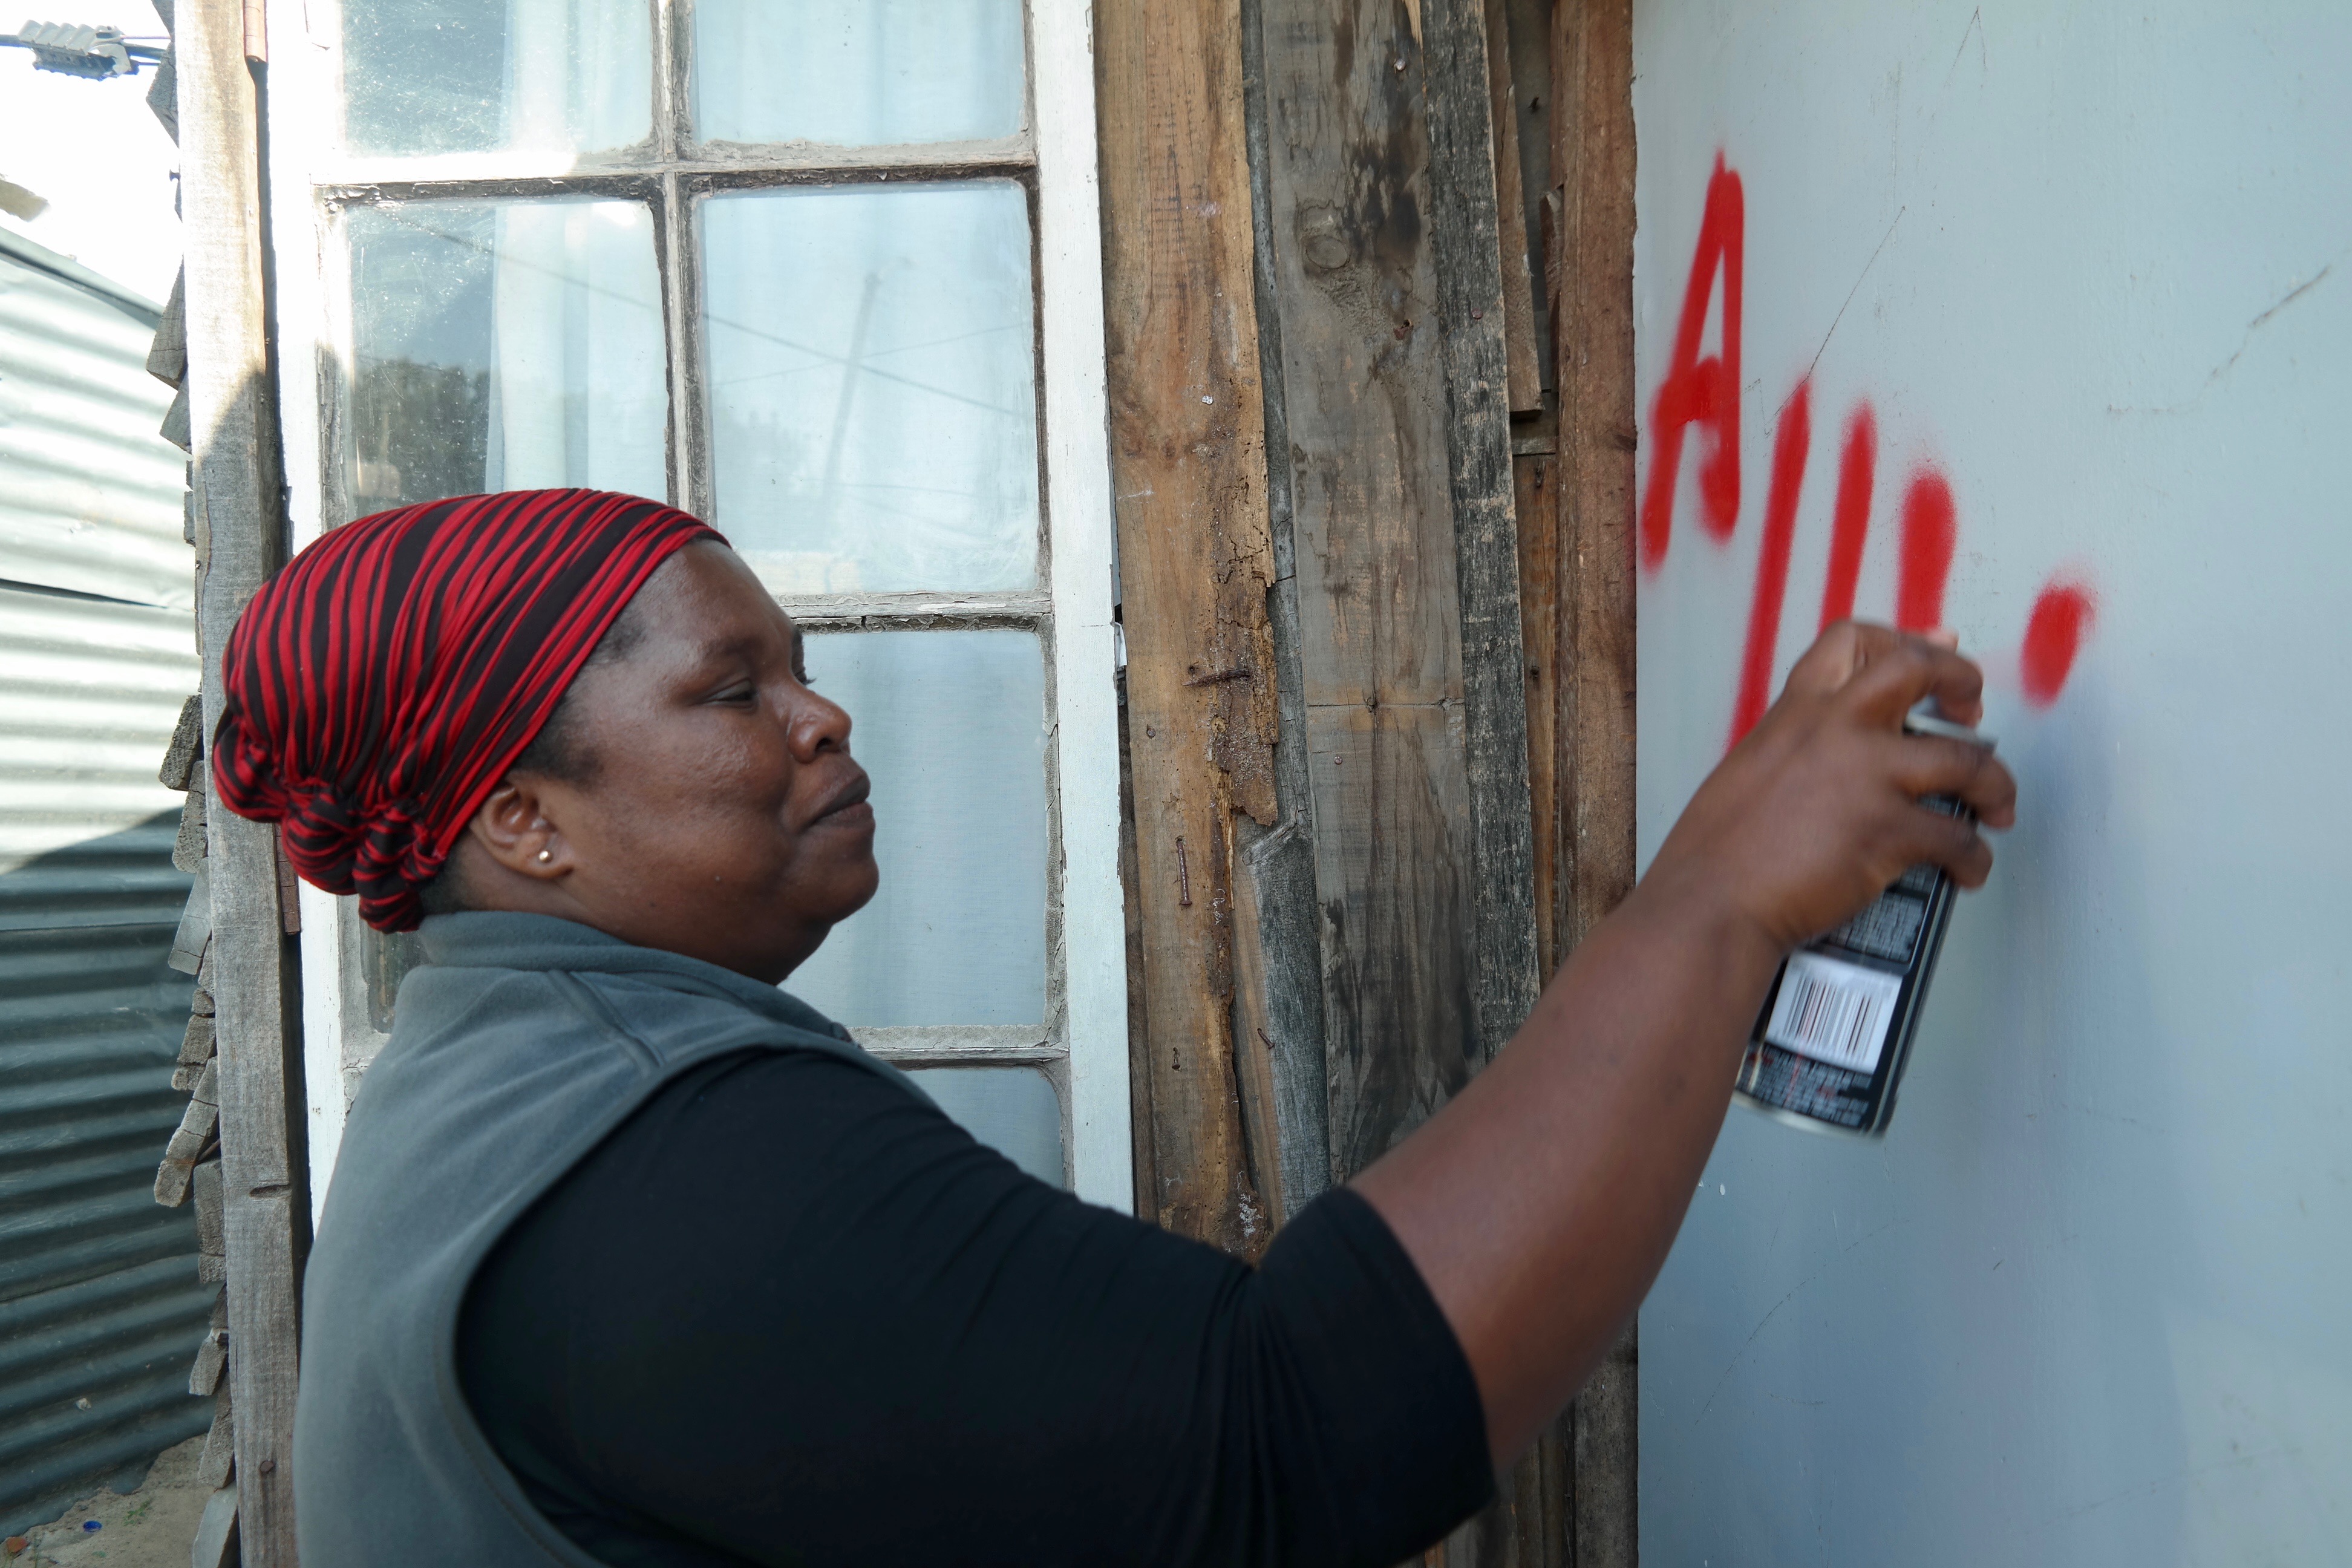 Each shack in the community is spray-painted with a number. In this case, the number is preceded by "A" to refer to the section of the settlement, given Kosovo's large size.